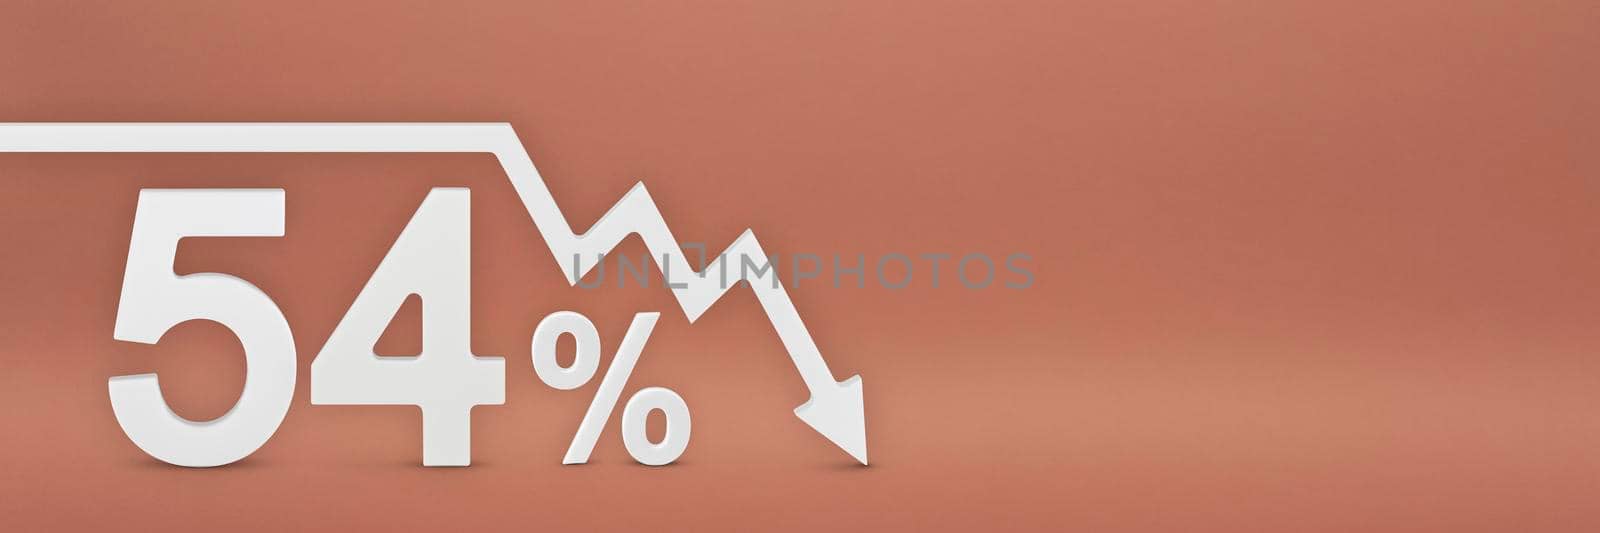 fifty-four percent, the arrow on the graph is pointing down. Stock market crash, bear market, inflation.Economic collapse, collapse of stocks.3d banner,54 percent discount sign on a red background. by SERSOL